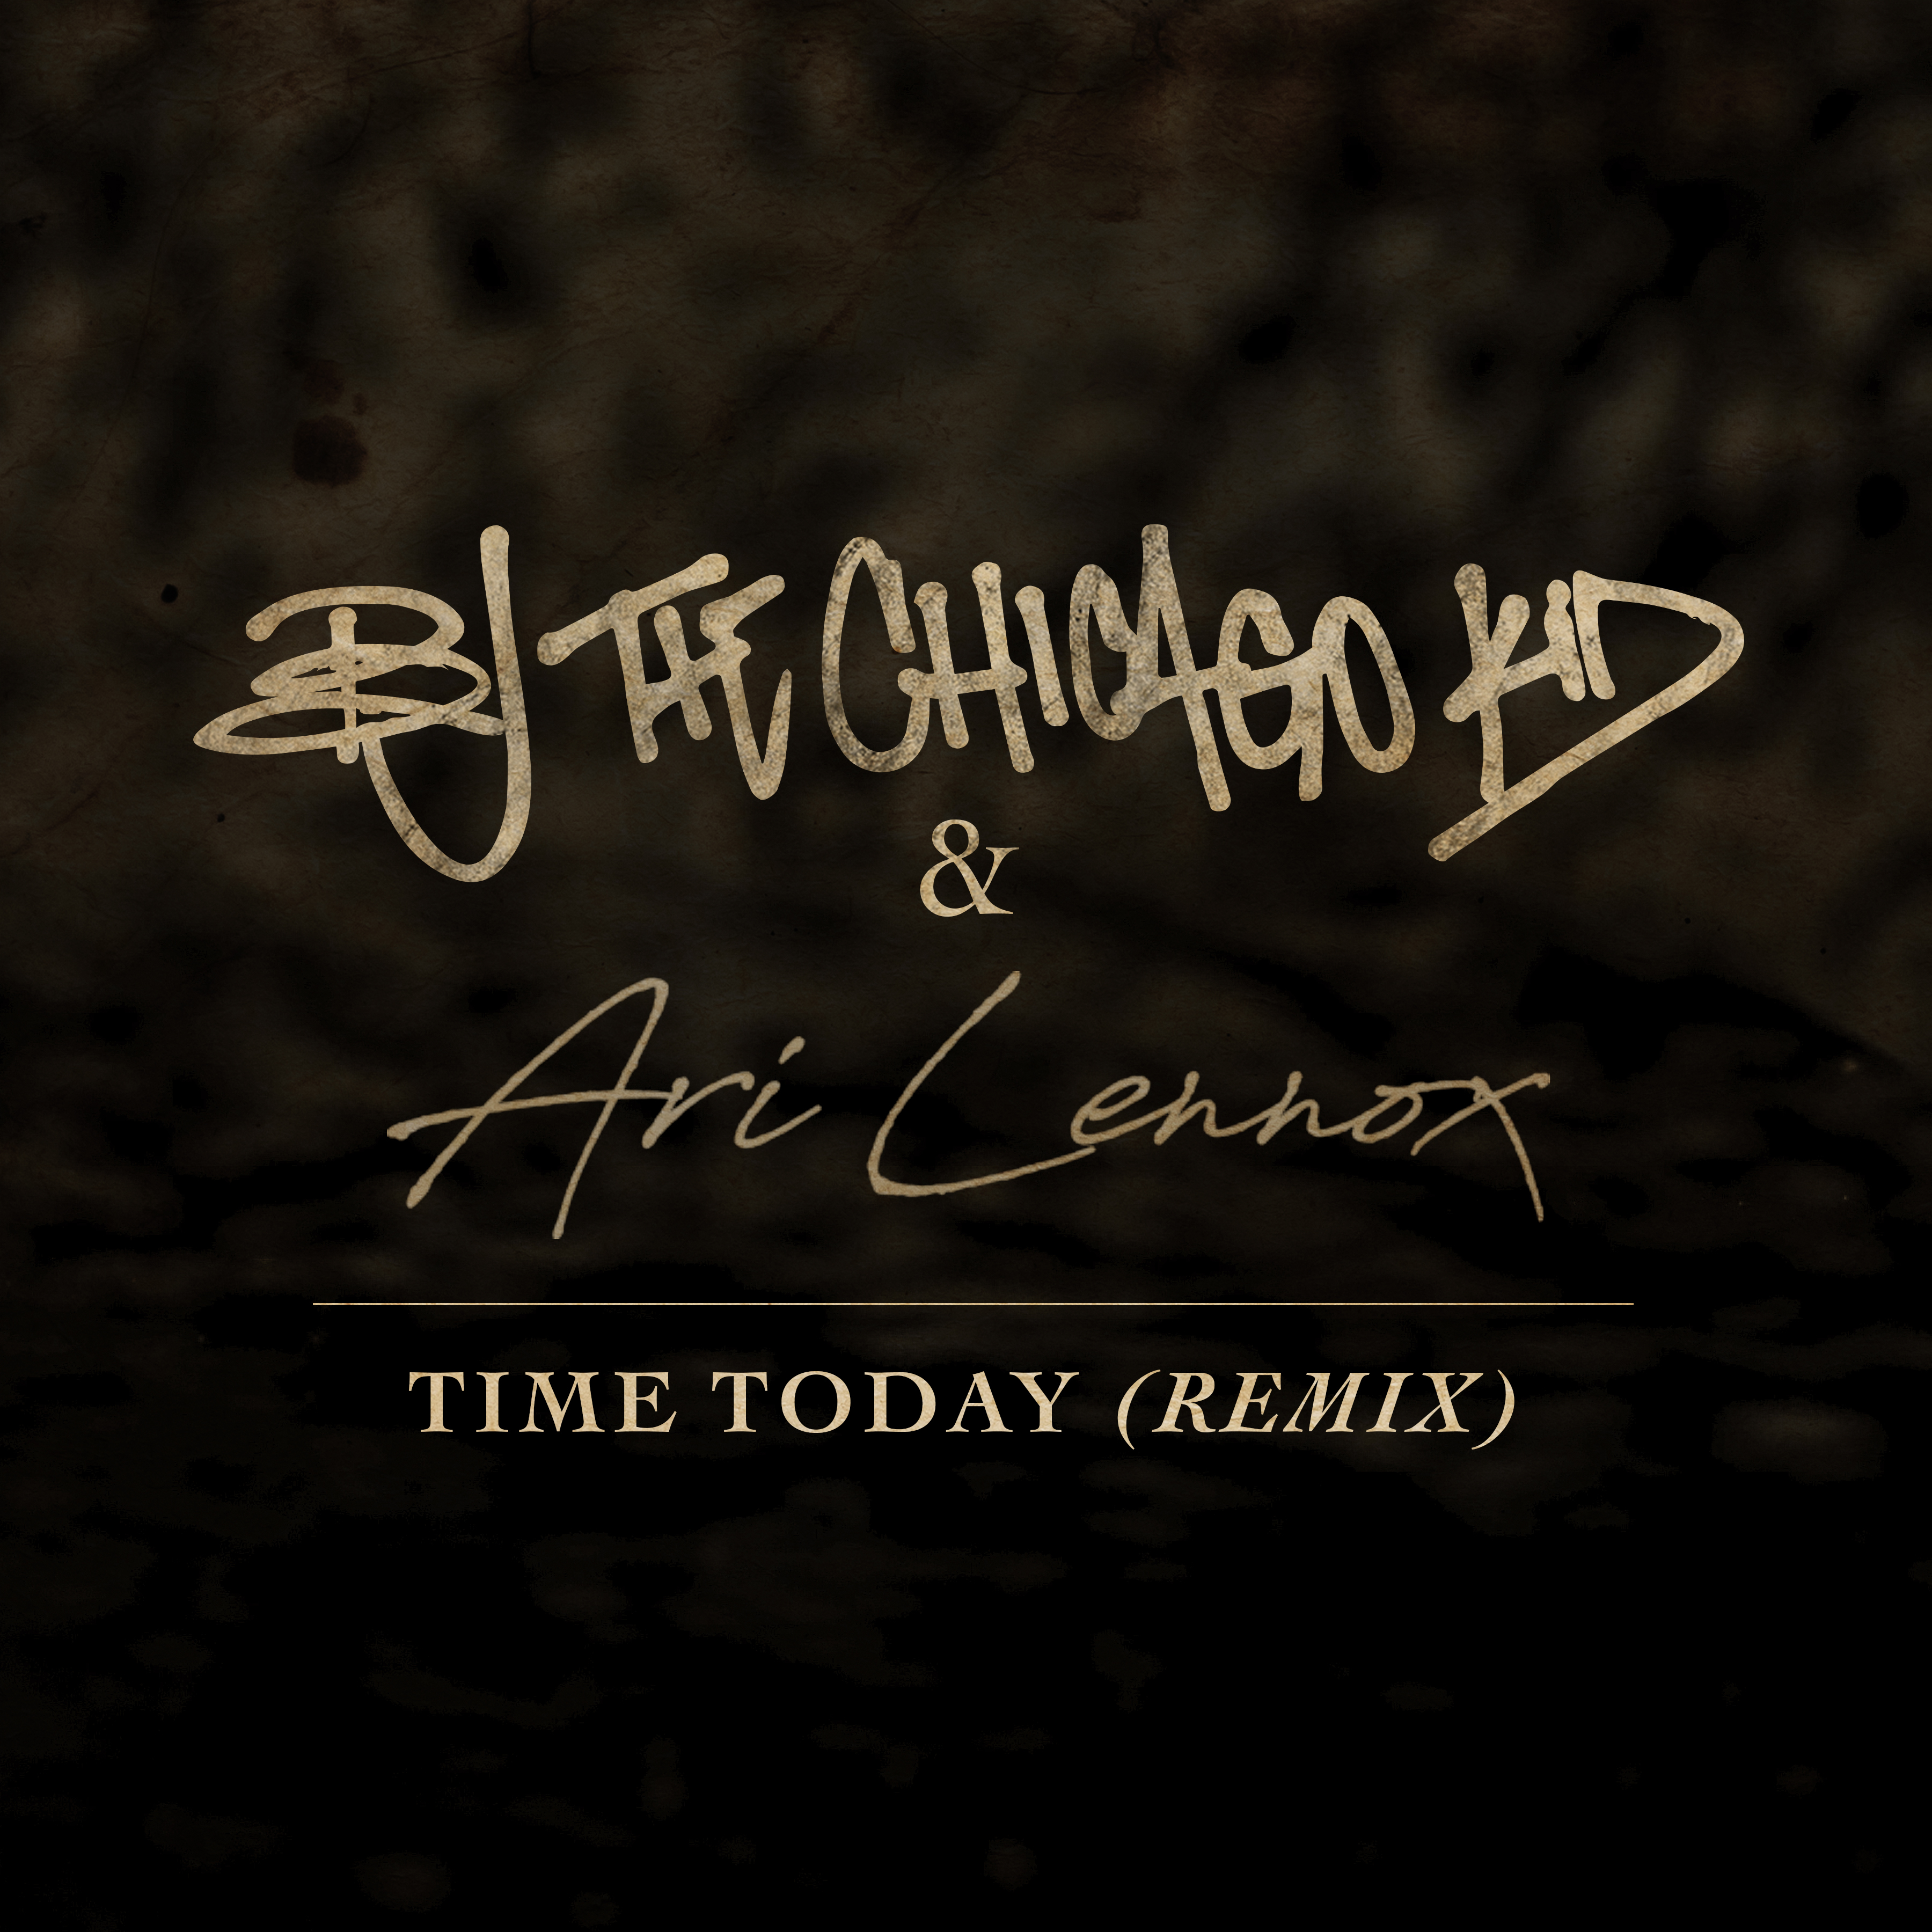 New Music: BJ the Chicago Kid – Time Today (Remix featuring Ari Lennox)